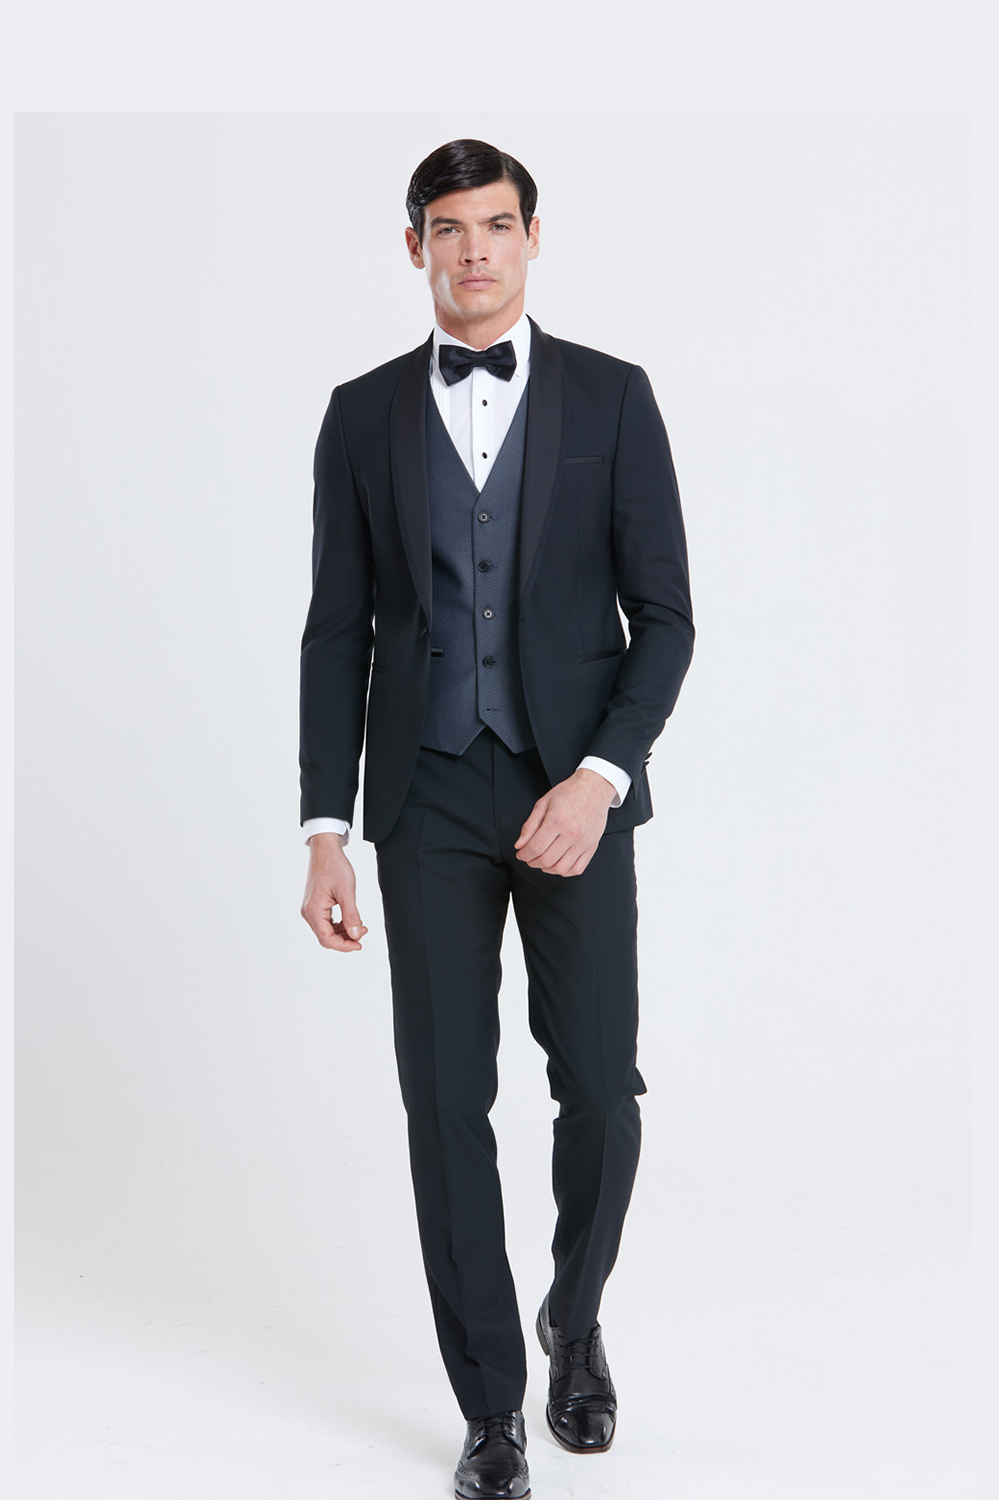 Black Morning Dress Jacket in Pure Wool Satin, grey waistcoat and striped  pants